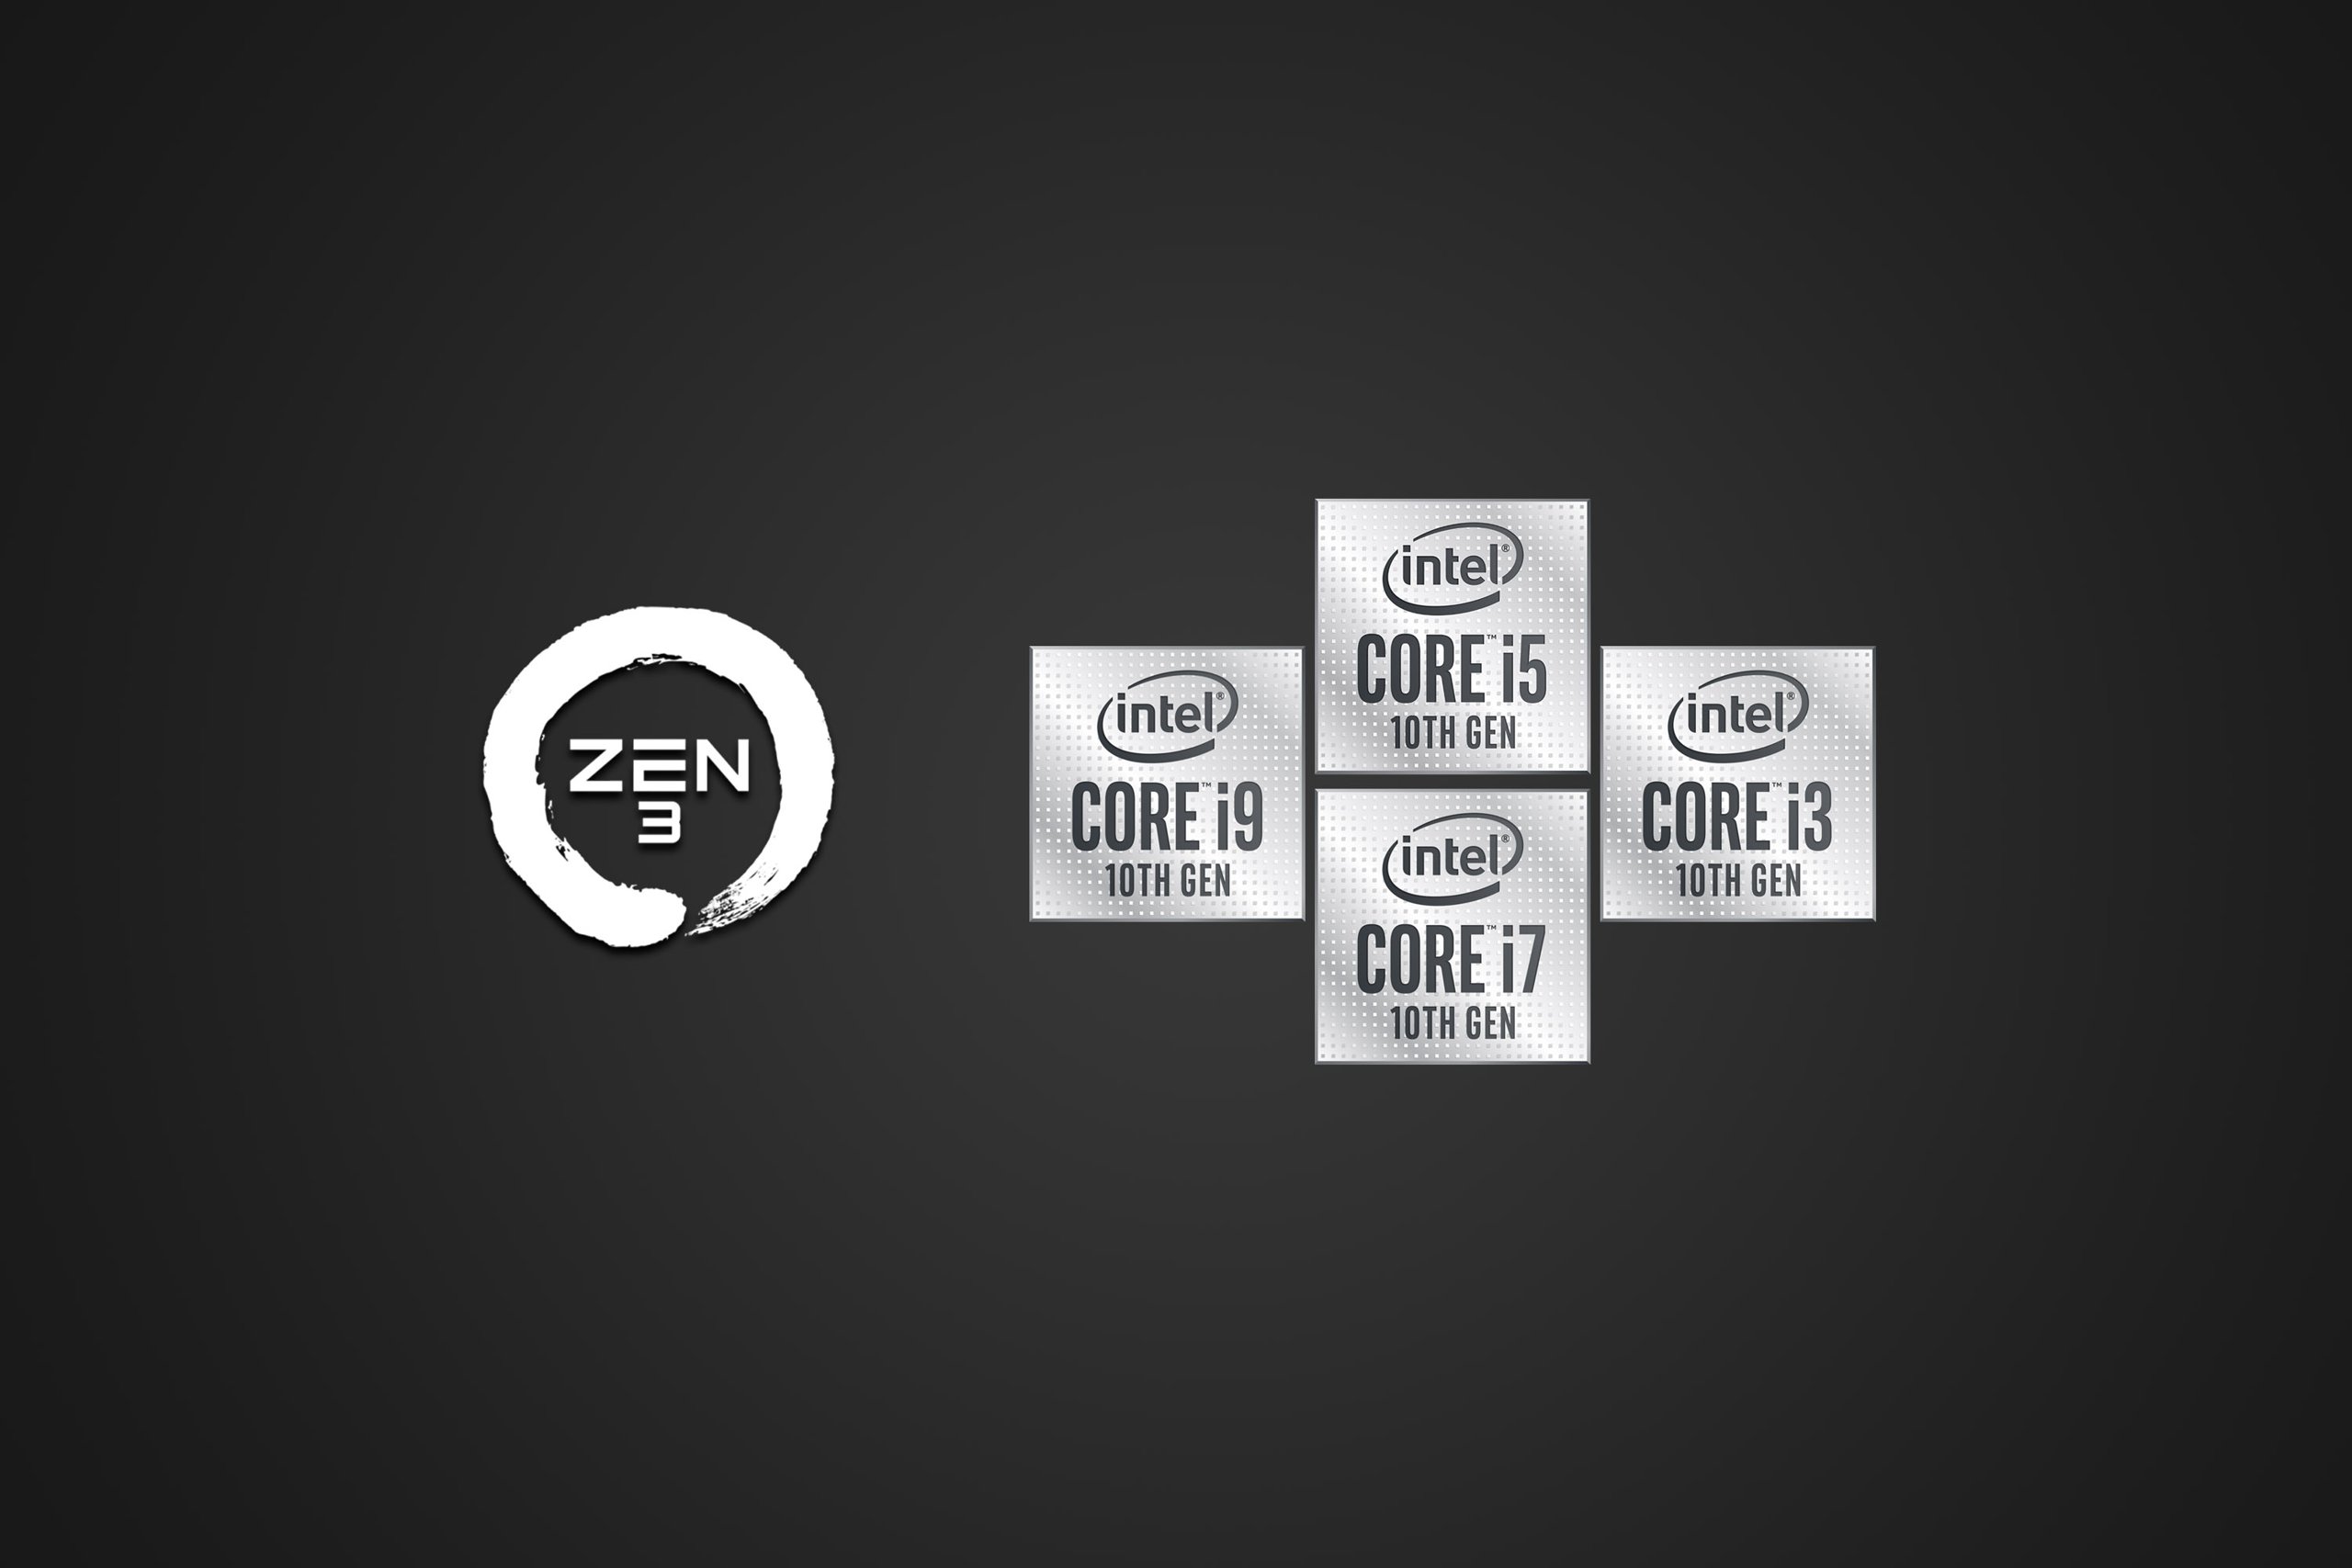 Post Banner for Comet Lake vs. Zen 3 Desktop Processors: How Do They Compare in Feature and Performance?